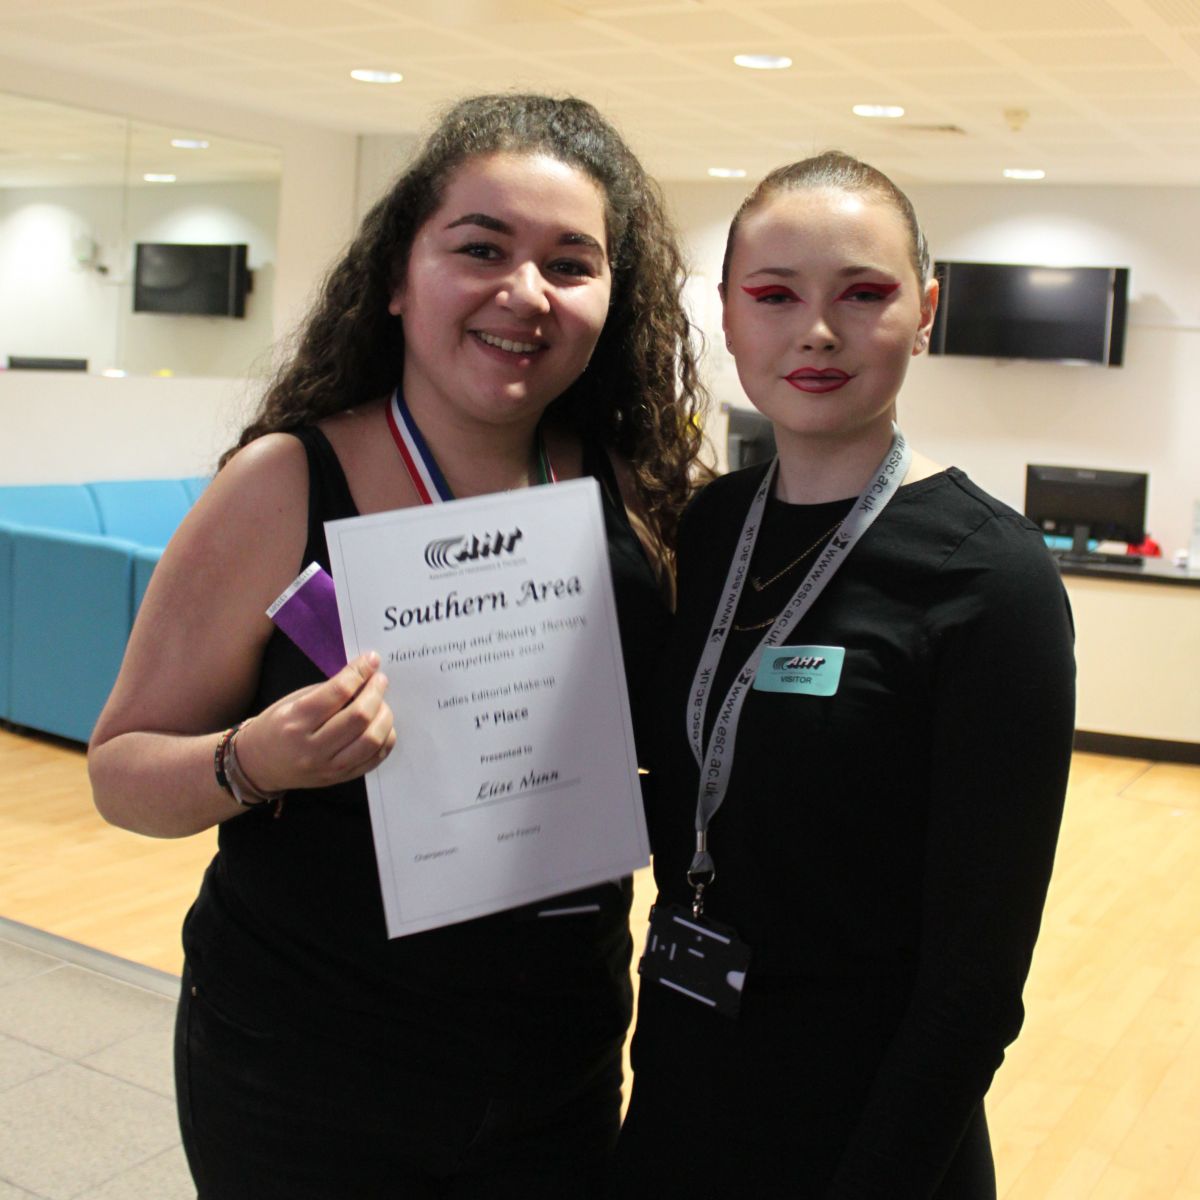 Elise win 1st Place at the Regional AHT competition, photographed with her model for the Ladies Editorial category.